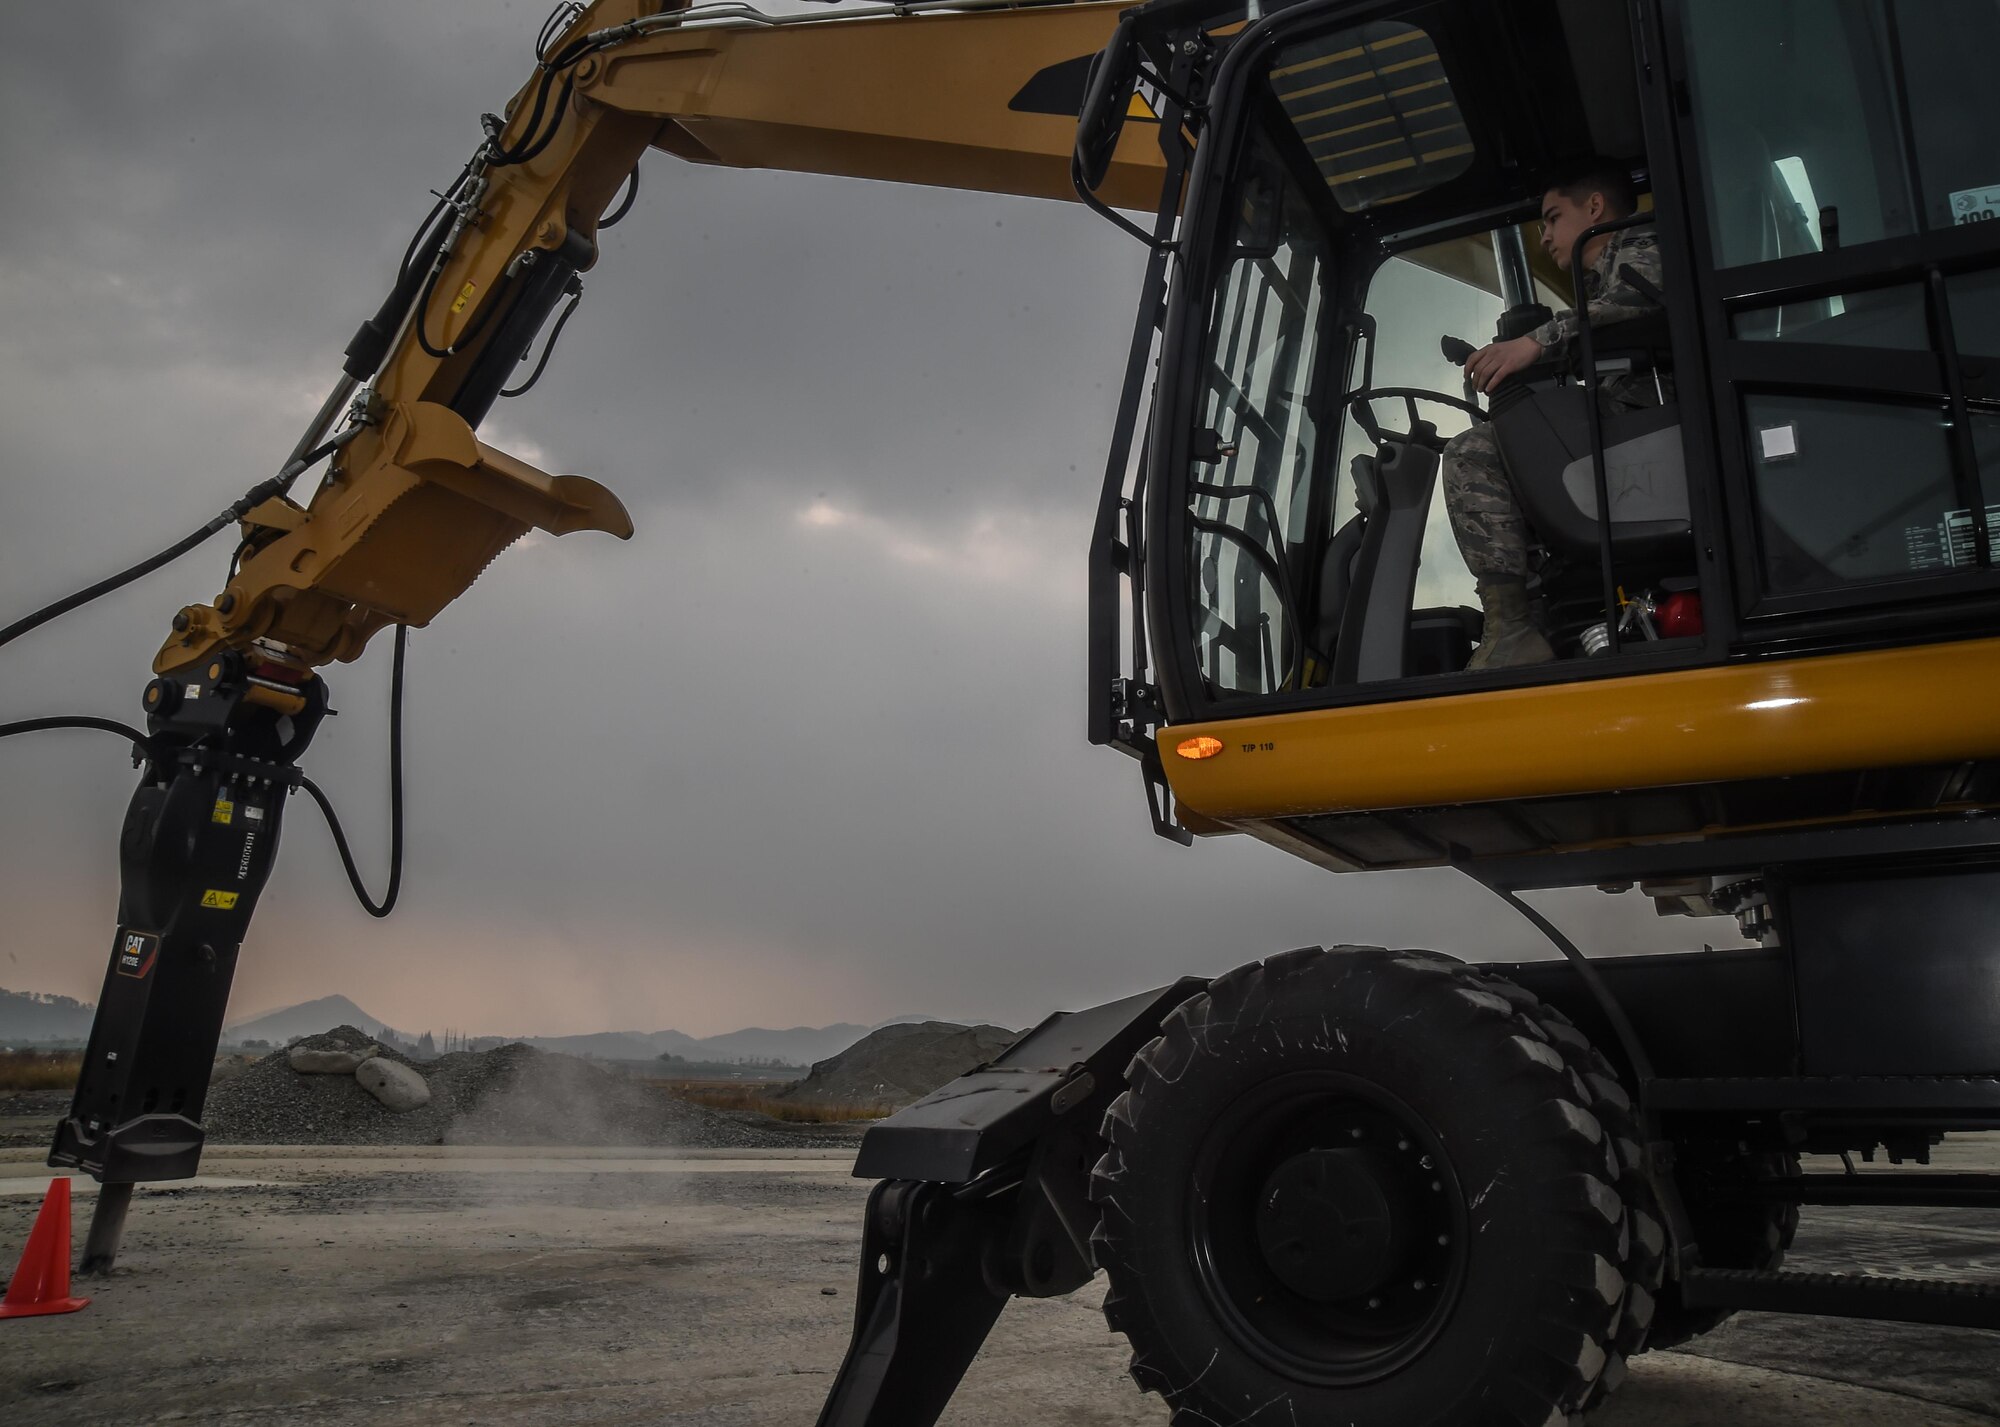 U.S. Air Force Senior Airman Cameron Pinkerton, 773d Civil Engineer Squadron, excavates a crater during a Rapid Airfield Damage Repair training exercise at Gwangju Air Base, Republic of Korea., Nov. 8, 2017. Similar to an assembly line, RADR systematically lines up civil engineer personnel and equipment to quickly repair a runway after attack. The new process makes use of rapid-setting concrete which enables vehicles to pass over it after one hour, and any aircraft after two hours of cure time. (U.S. Air Force photo by Senior Airman Curt Beach)